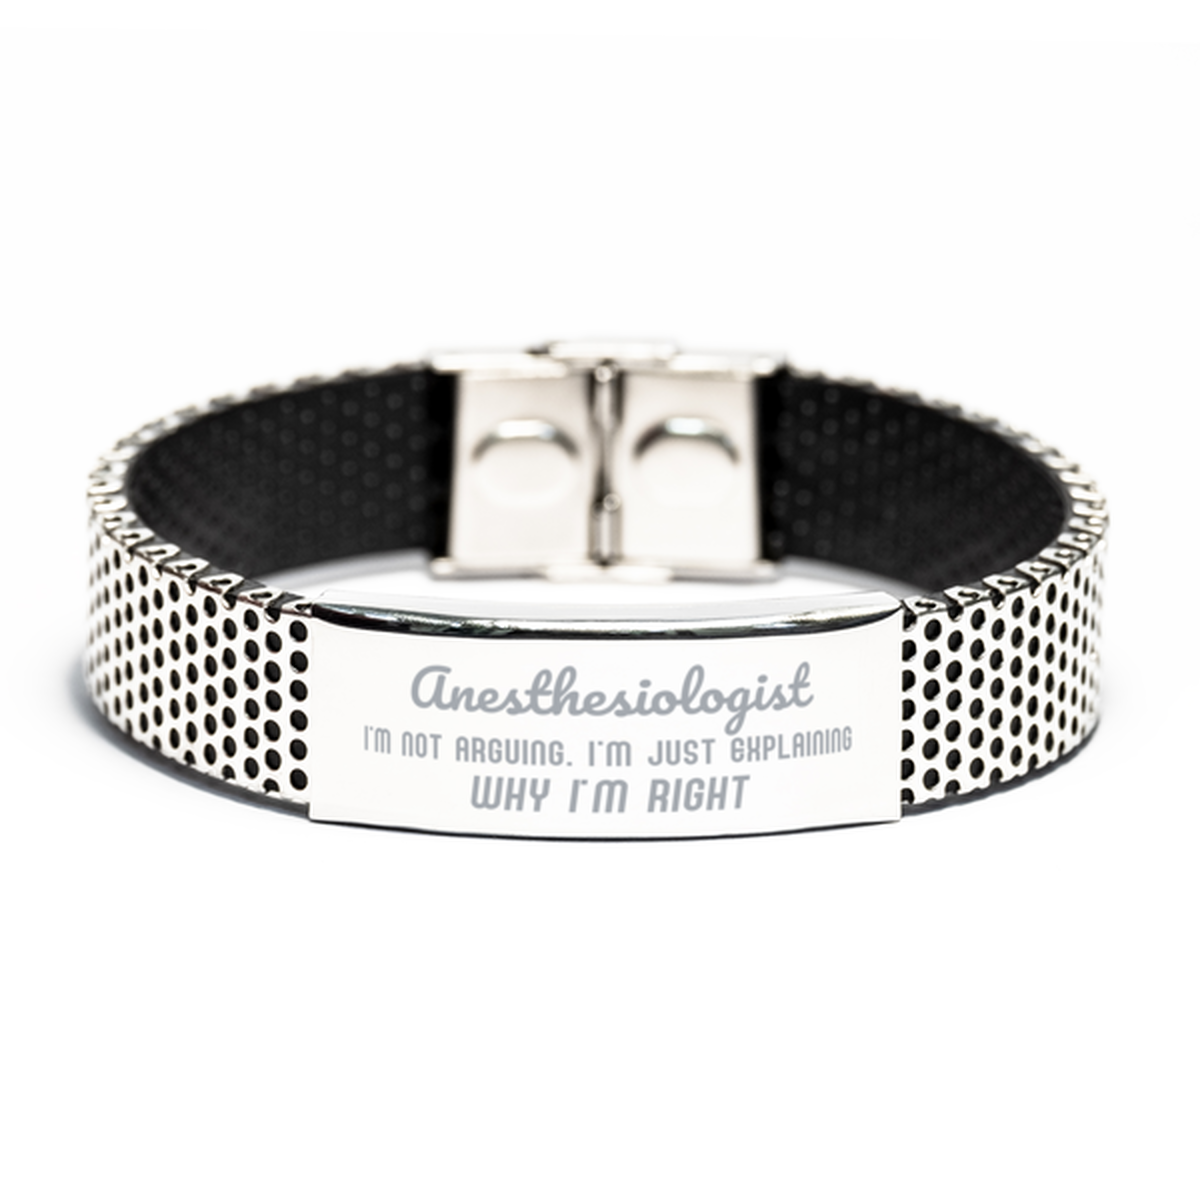 Anesthesiologist I'm not Arguing. I'm Just Explaining Why I'm RIGHT Stainless Steel Bracelet, Funny Saying Quote Anesthesiologist Gifts For Anesthesiologist Graduation Birthday Christmas Gifts for Men Women Coworker